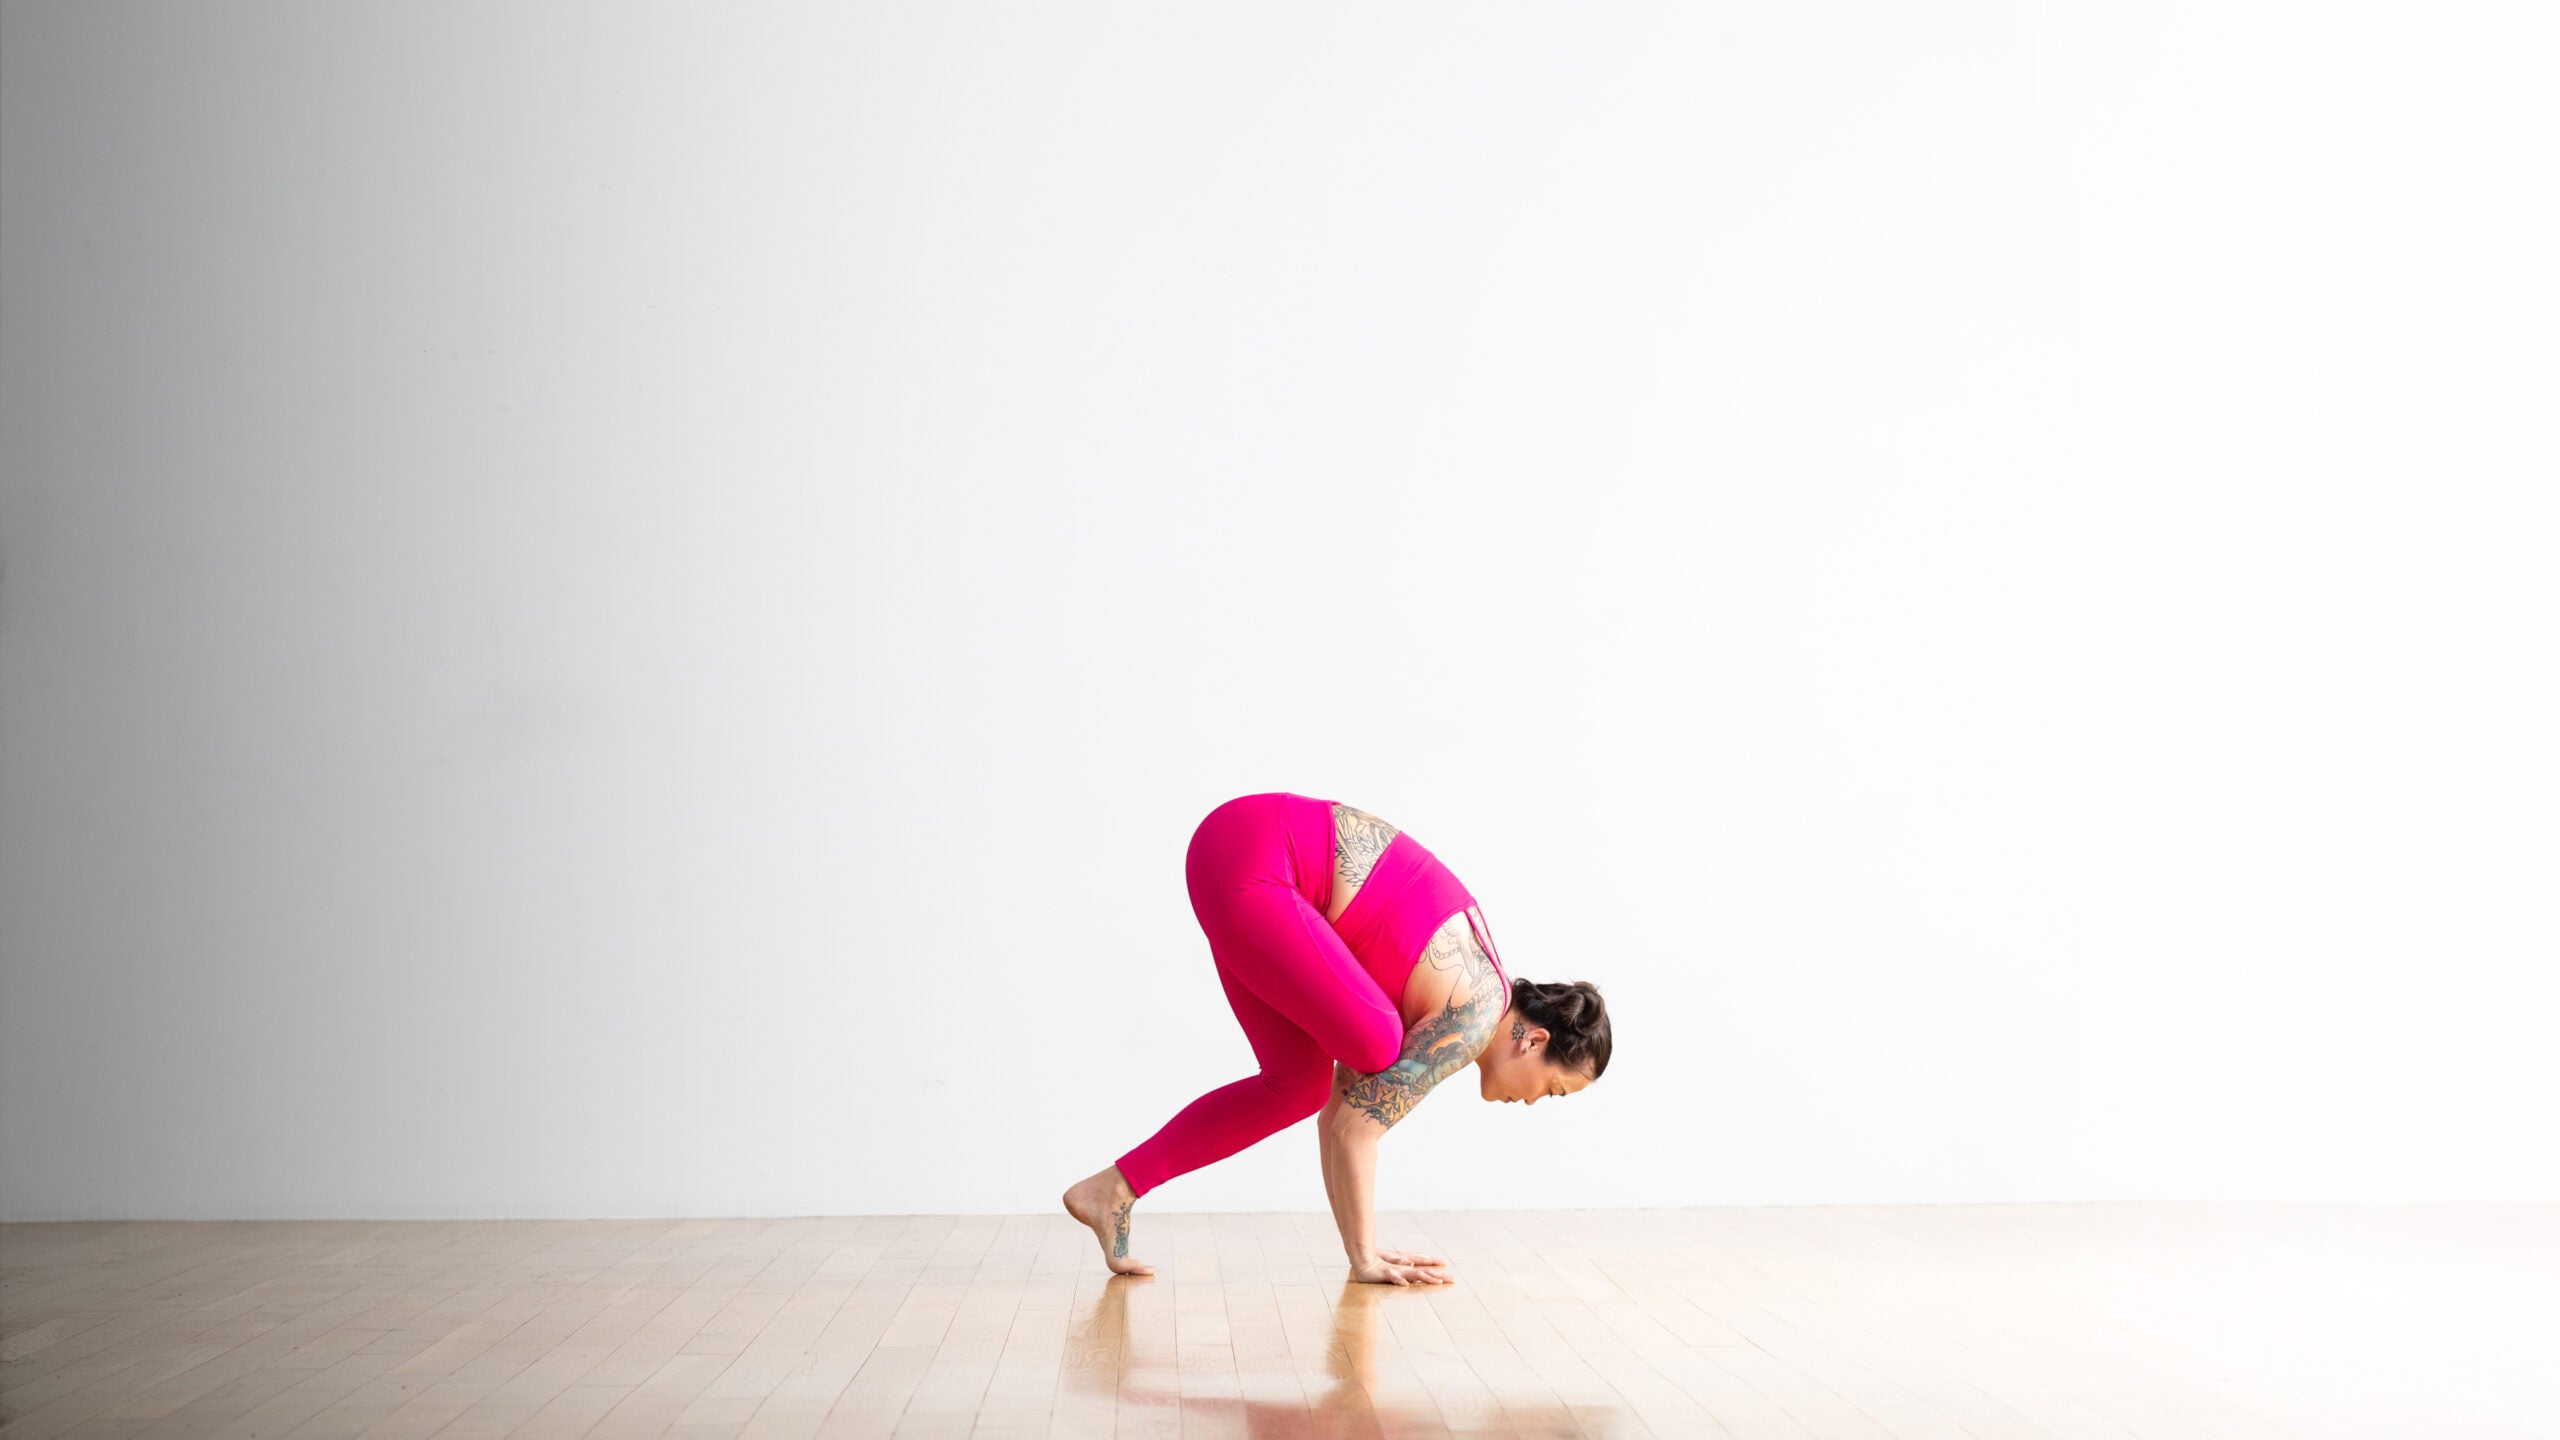 7 Hip Opener Yoga Poses To Release Negativity (Photos)